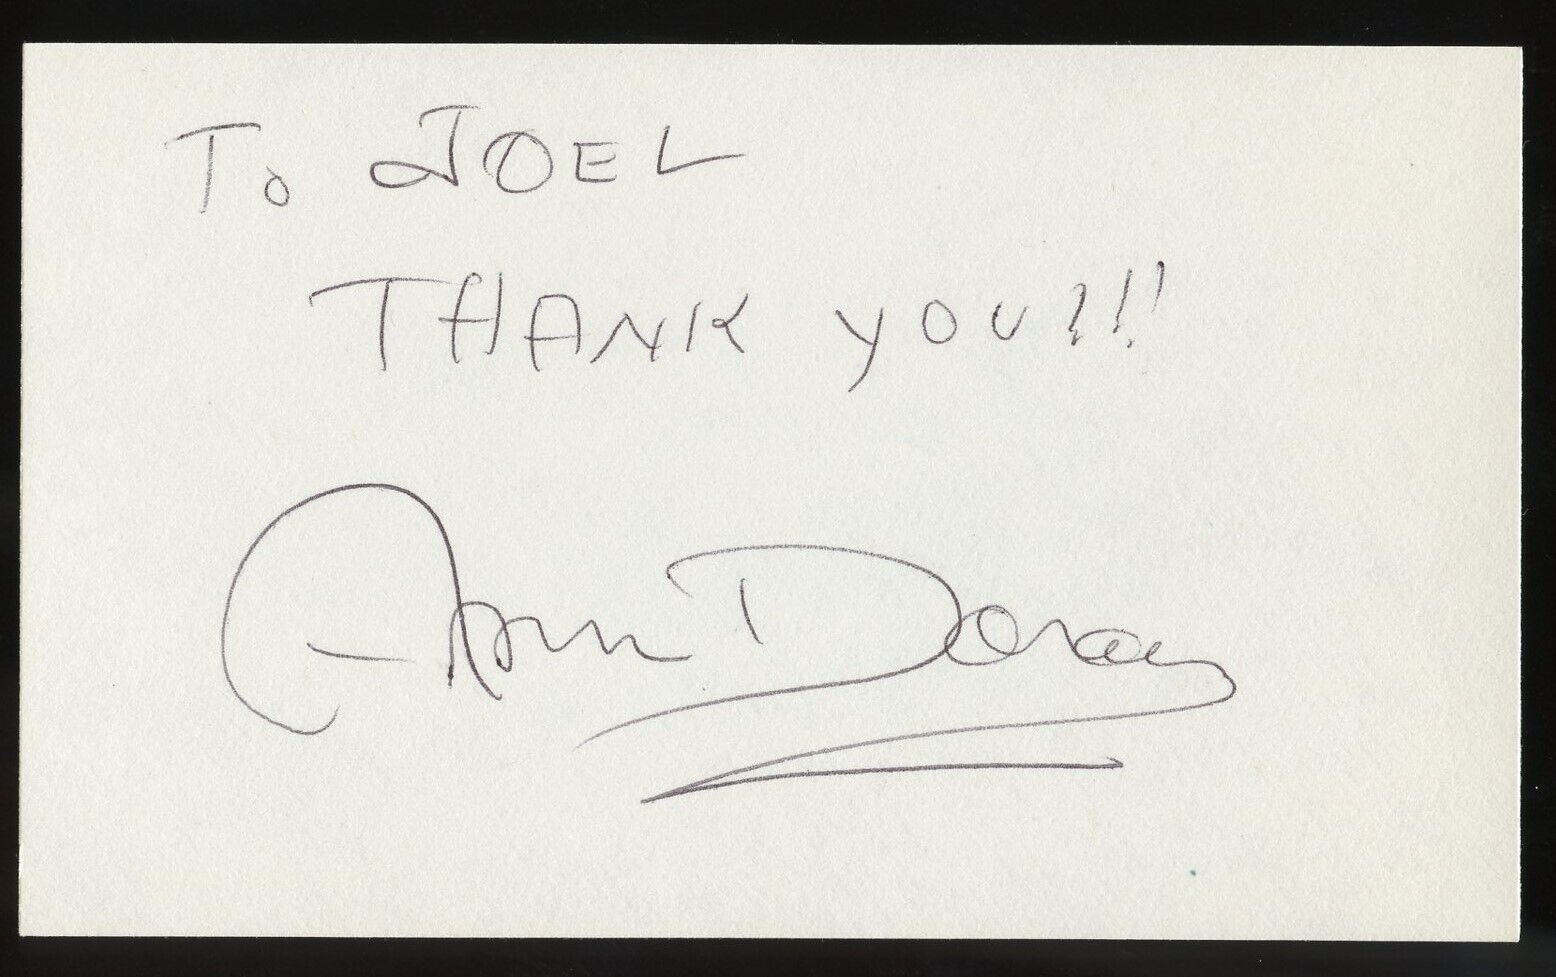 Ann Doran d2000 signed autograph 3x5 Cut American Actress Rebel Without a Cause